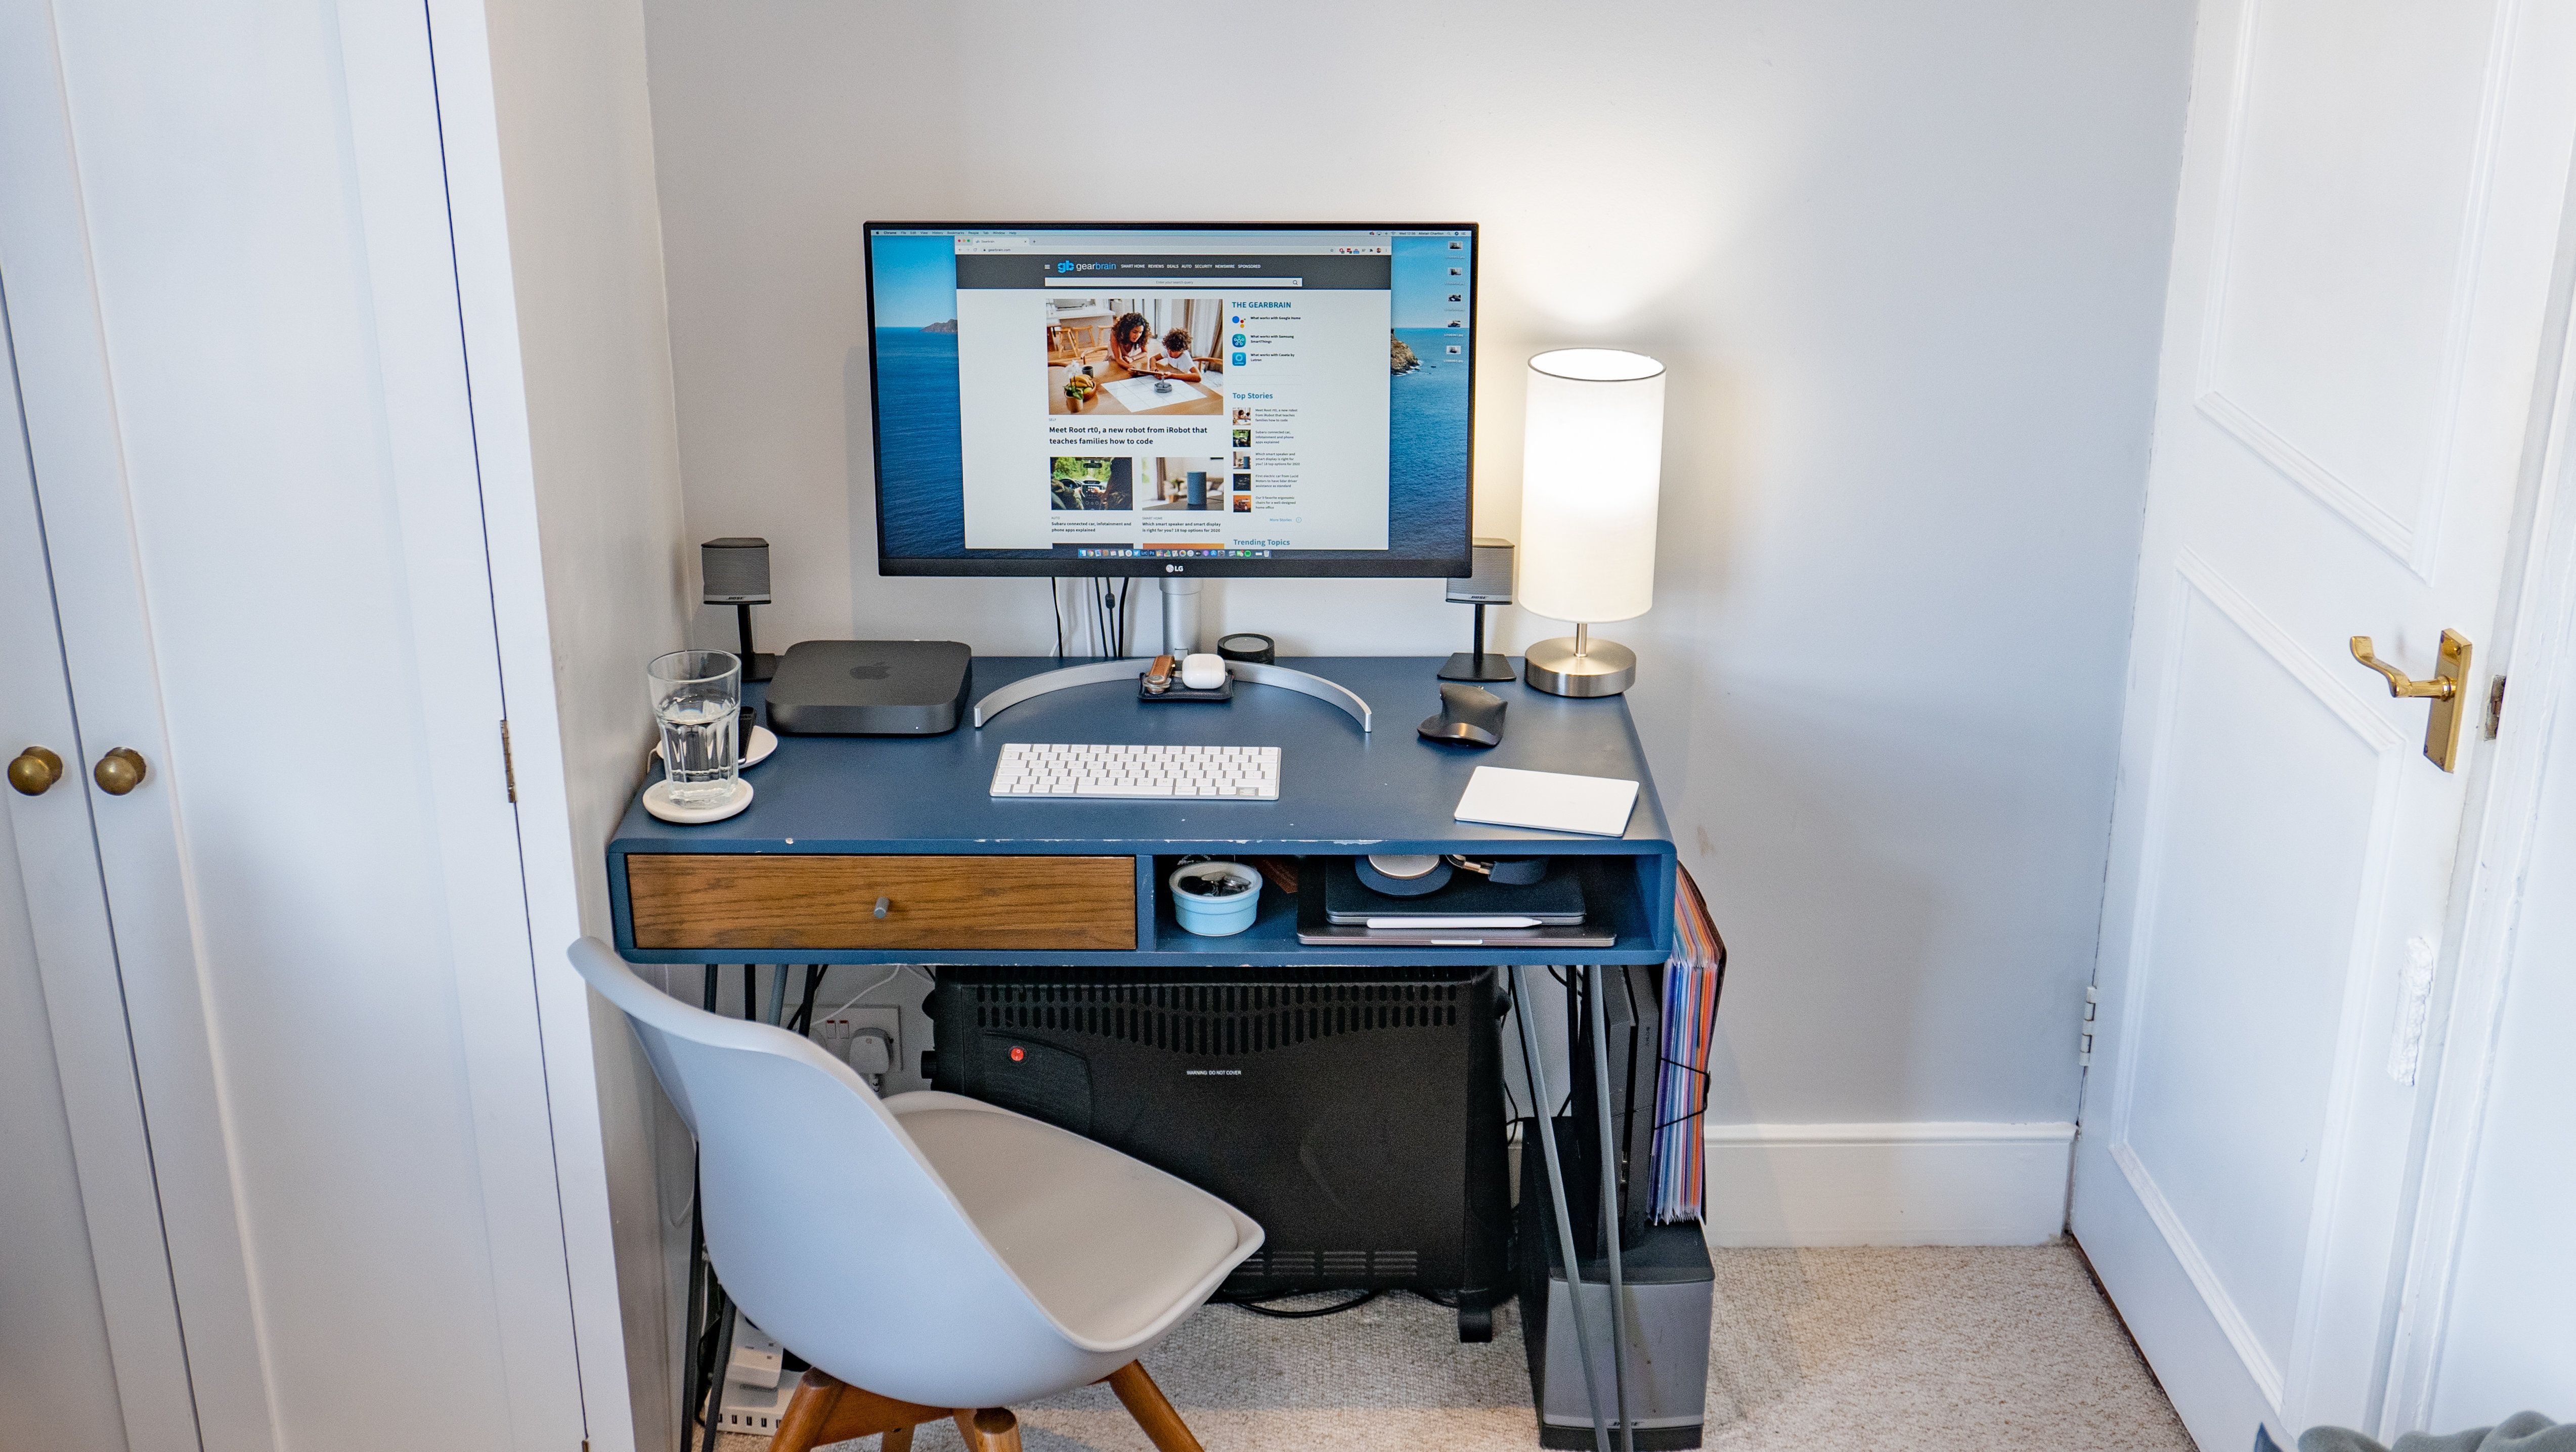 https://www.gearbrain.com/media-library/less-than-p-greater-than-a-compact-desk-can-still-be-large-enough-for-a-functional-home-office-less-than-p-greater-than.jpg?id=23520044